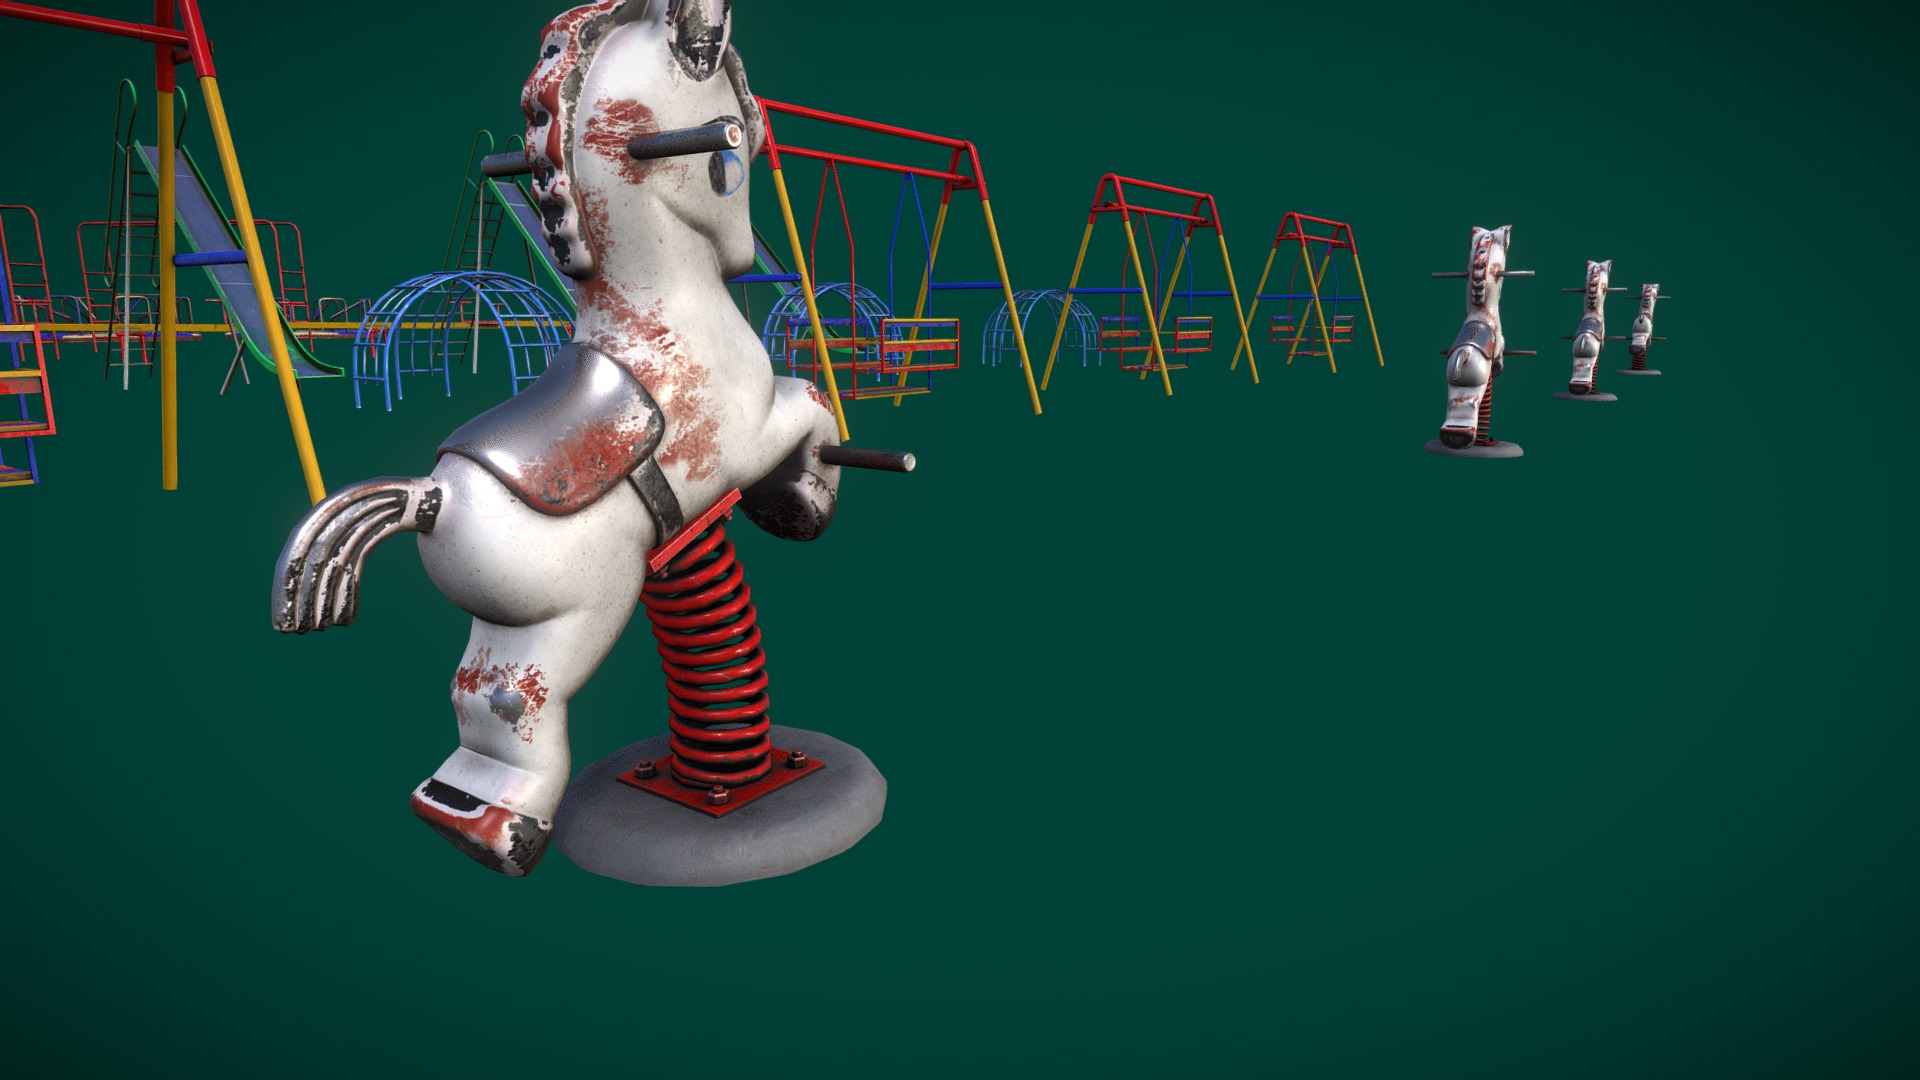 3D model Playground Equipment pack with LOD versions - This is a 3D model of the Playground Equipment pack with LOD versions. The 3D model is about a toy figurine of a unicorn.